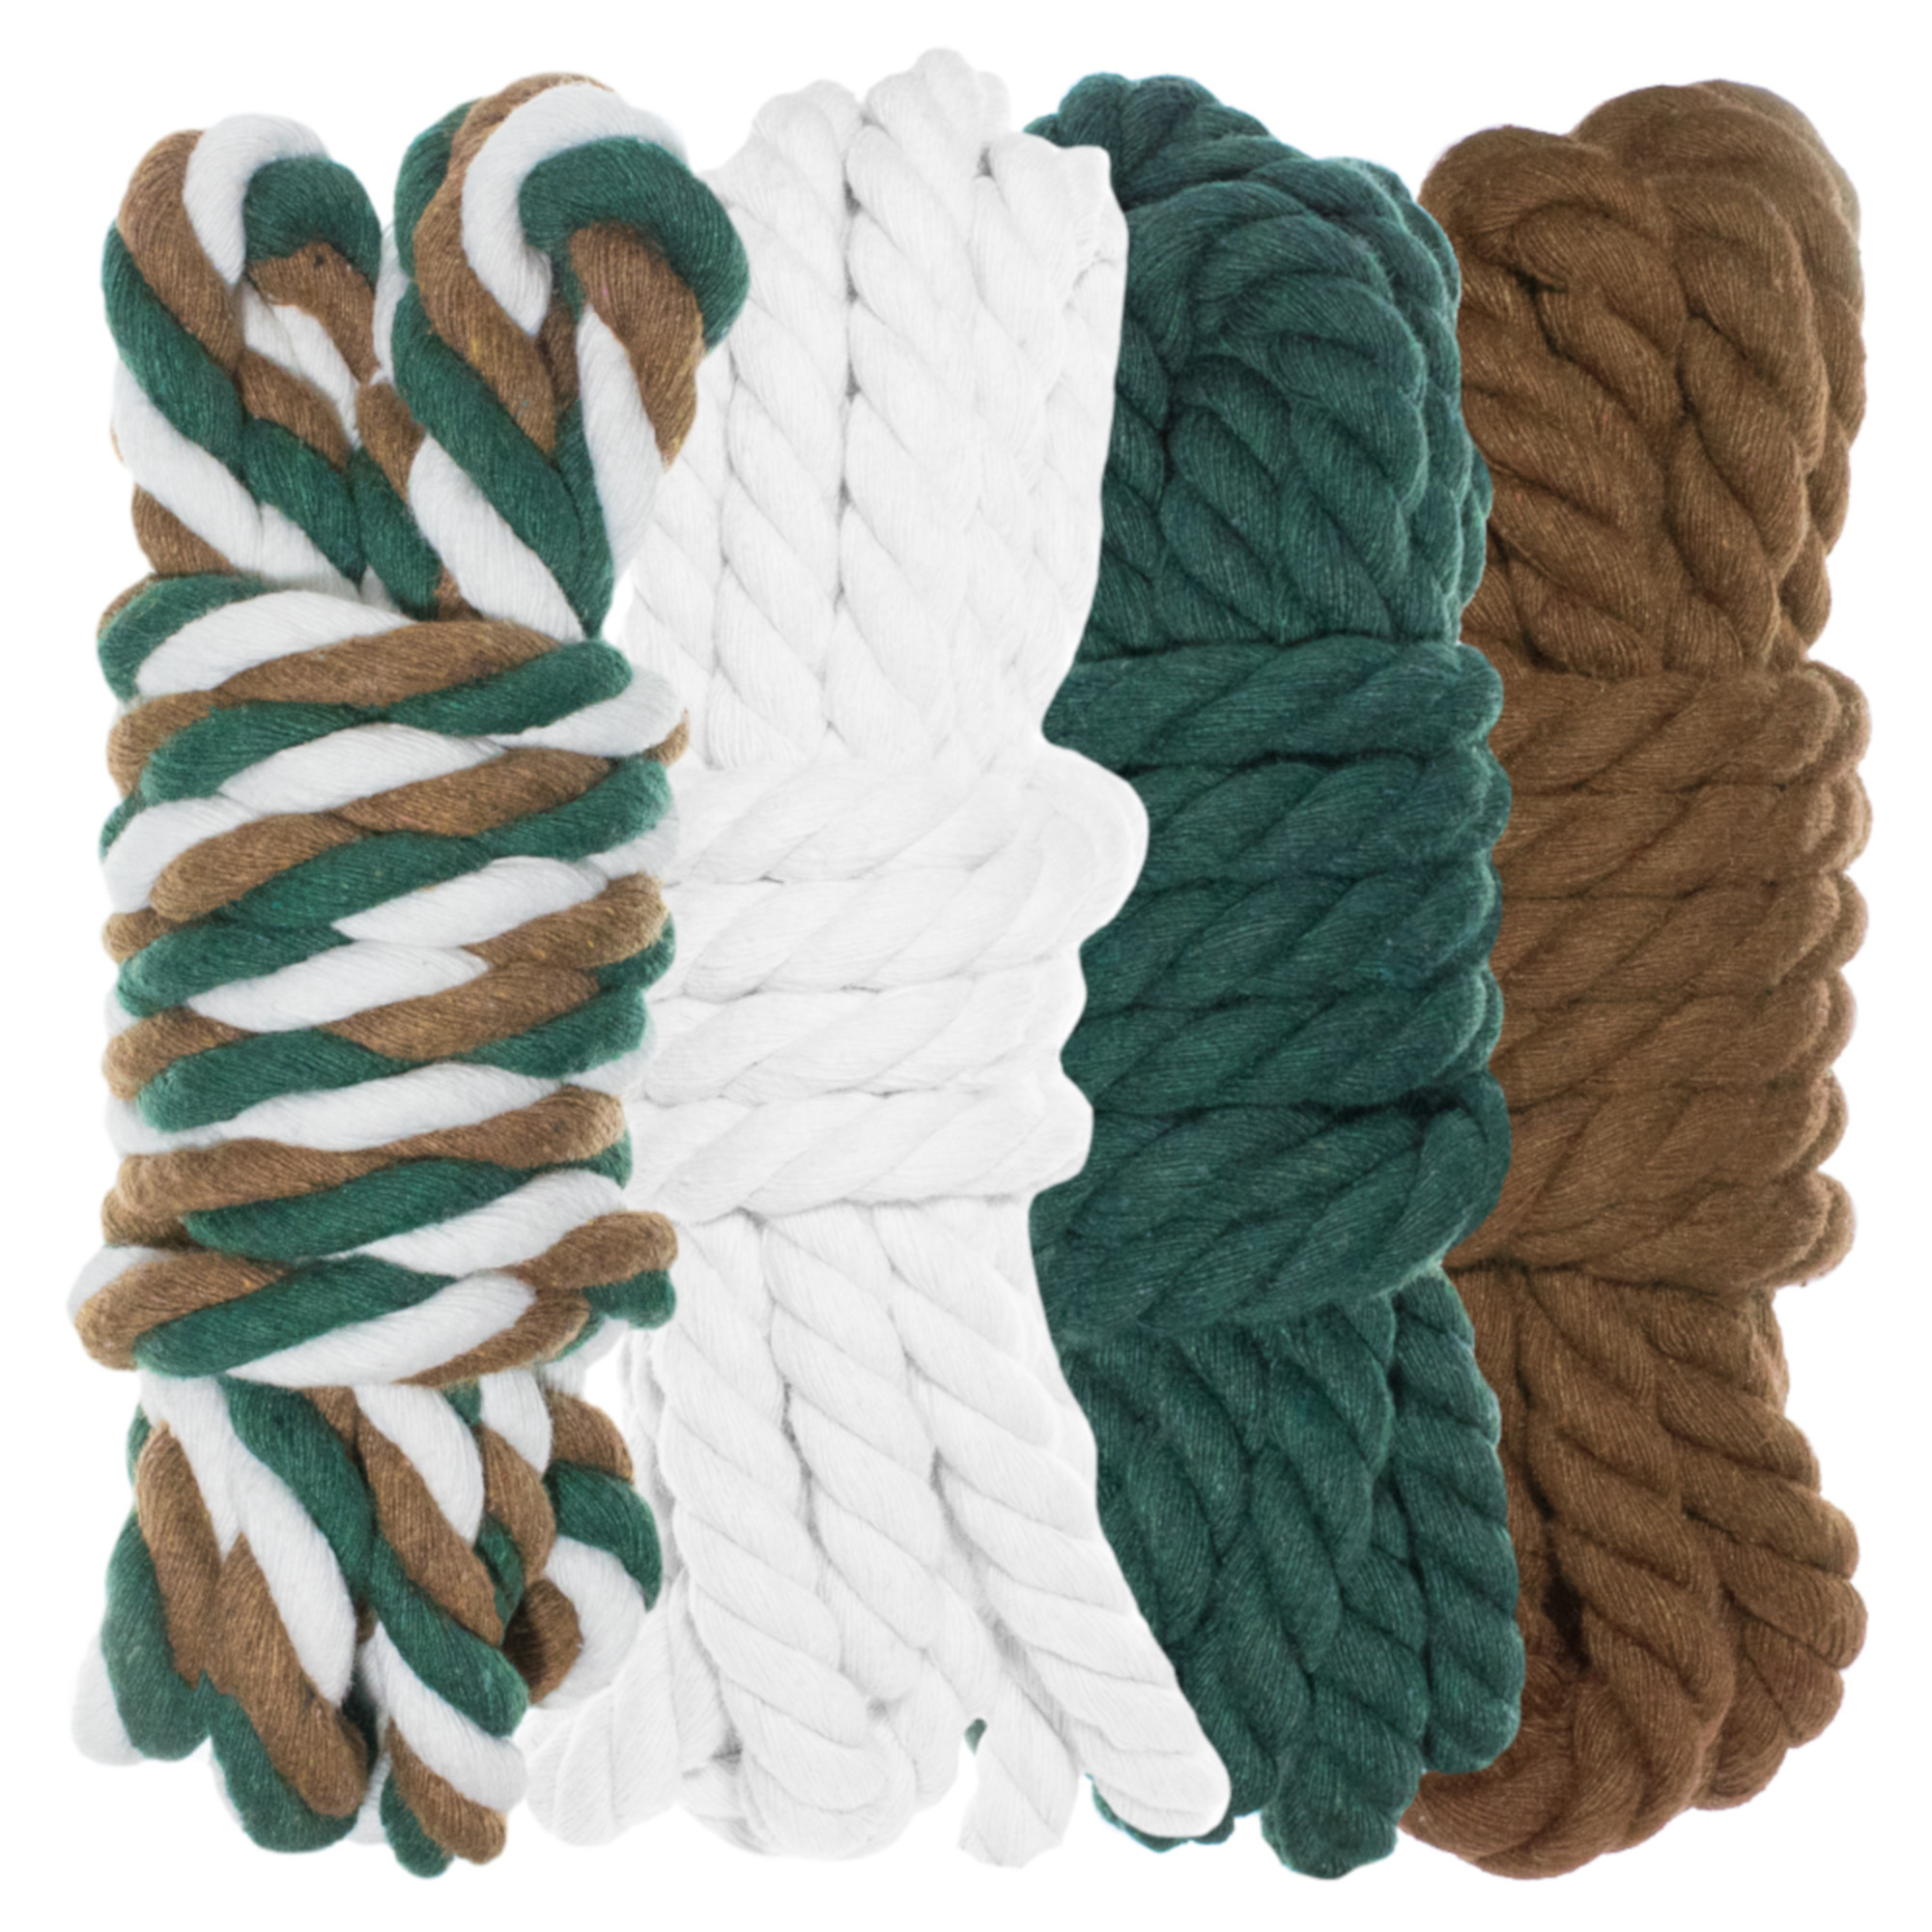 Twisted 3 Strand Natural Cotton Rope 40 and 100 Foot Kits in 1/4 inch and 1/2 inch - Soft Knot Tying Artisan Cord Decorative Crafting - Assorted